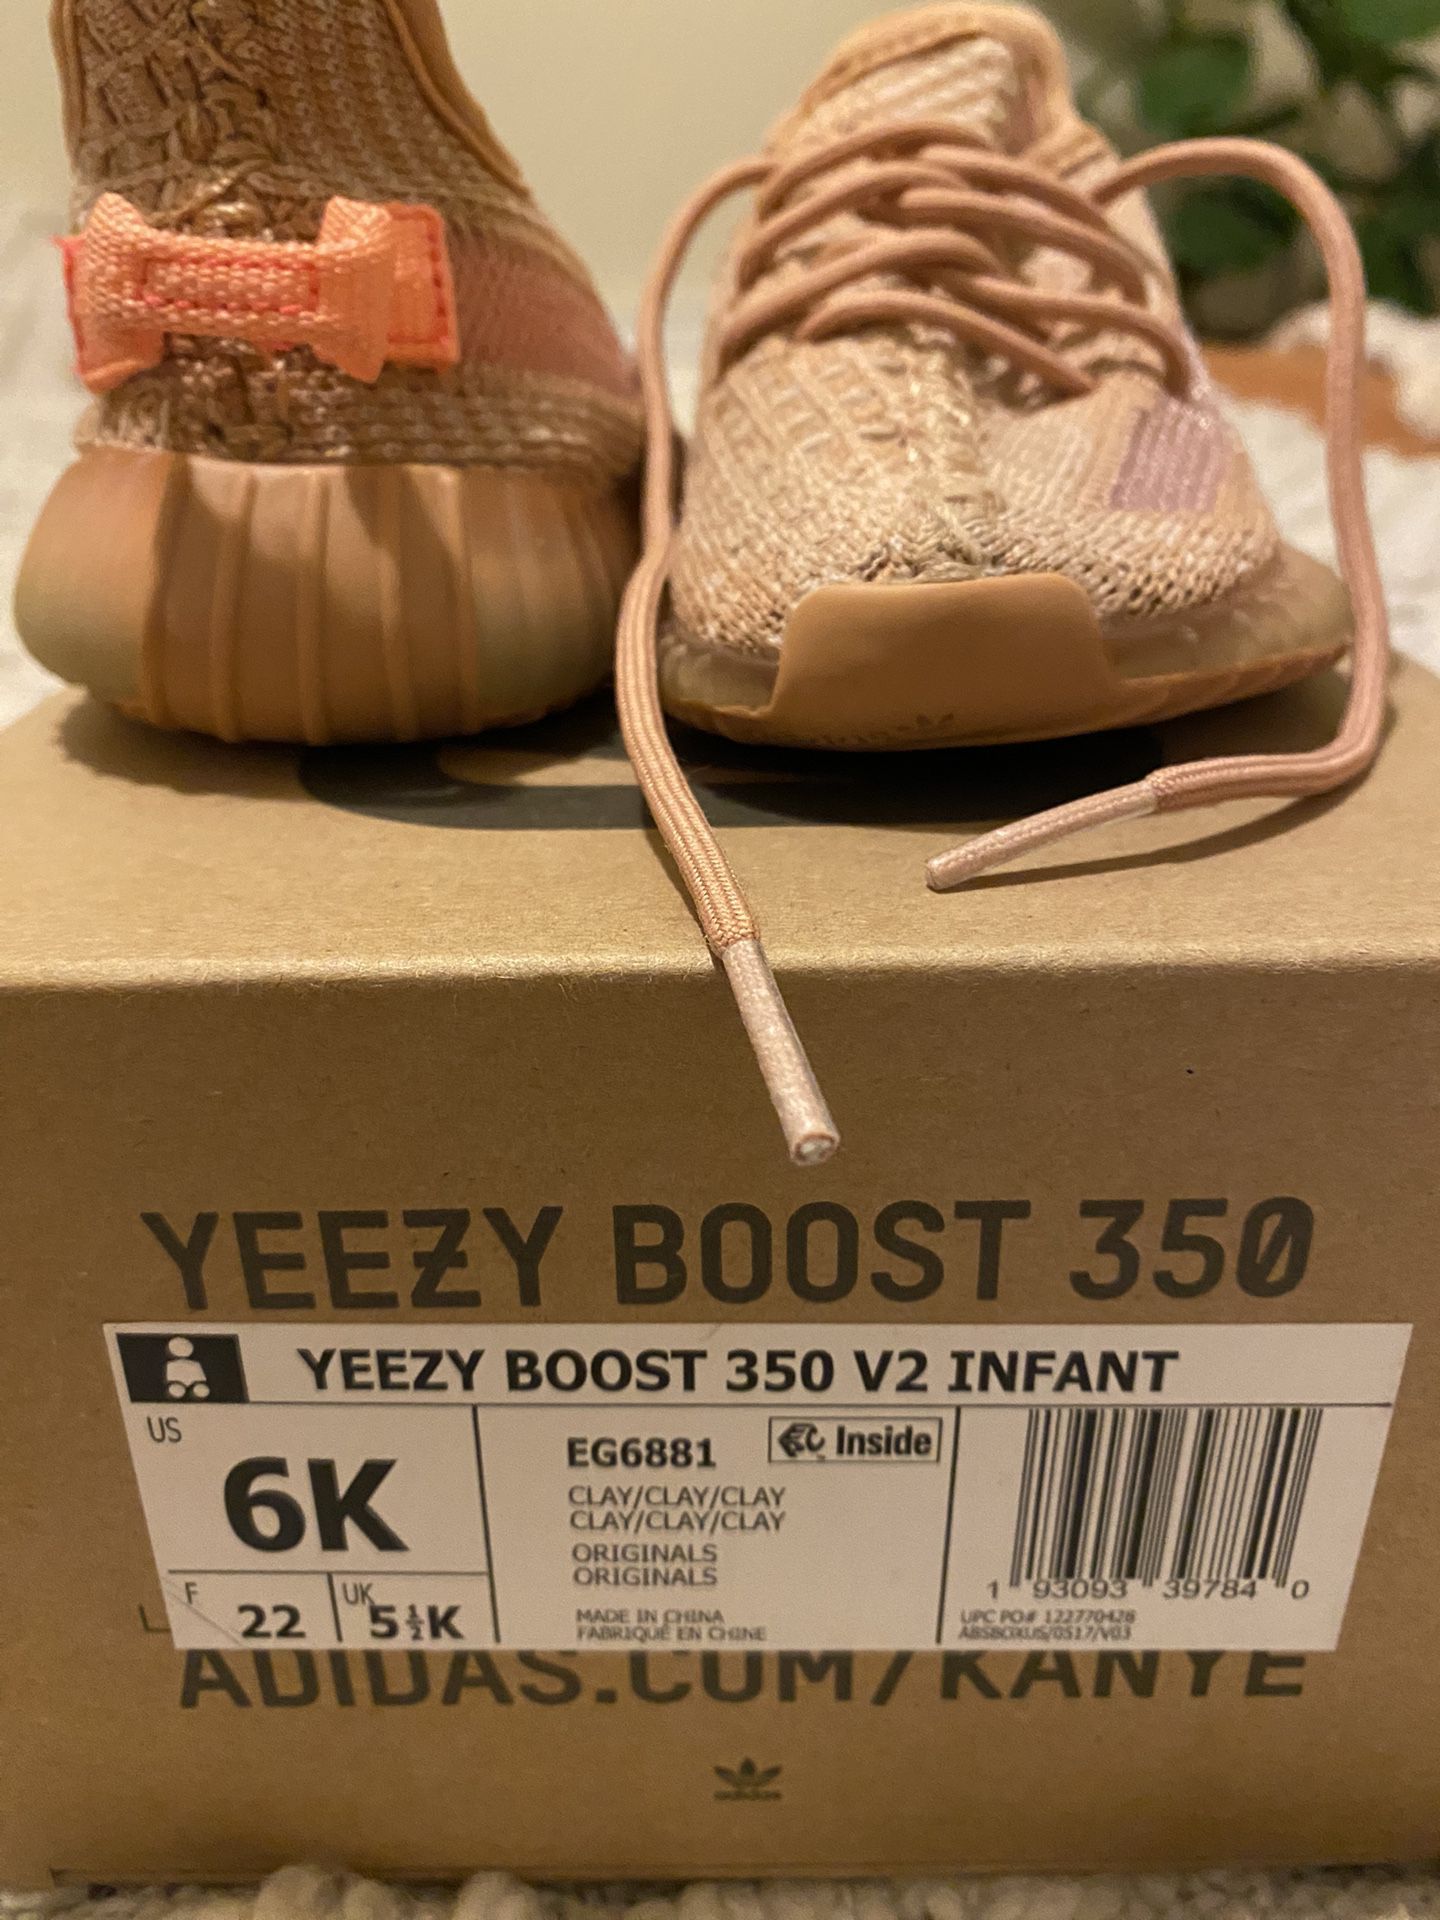 Yeezy Boost 350 Size 6k Infant In CLAY for Sale in Glendale, CA -